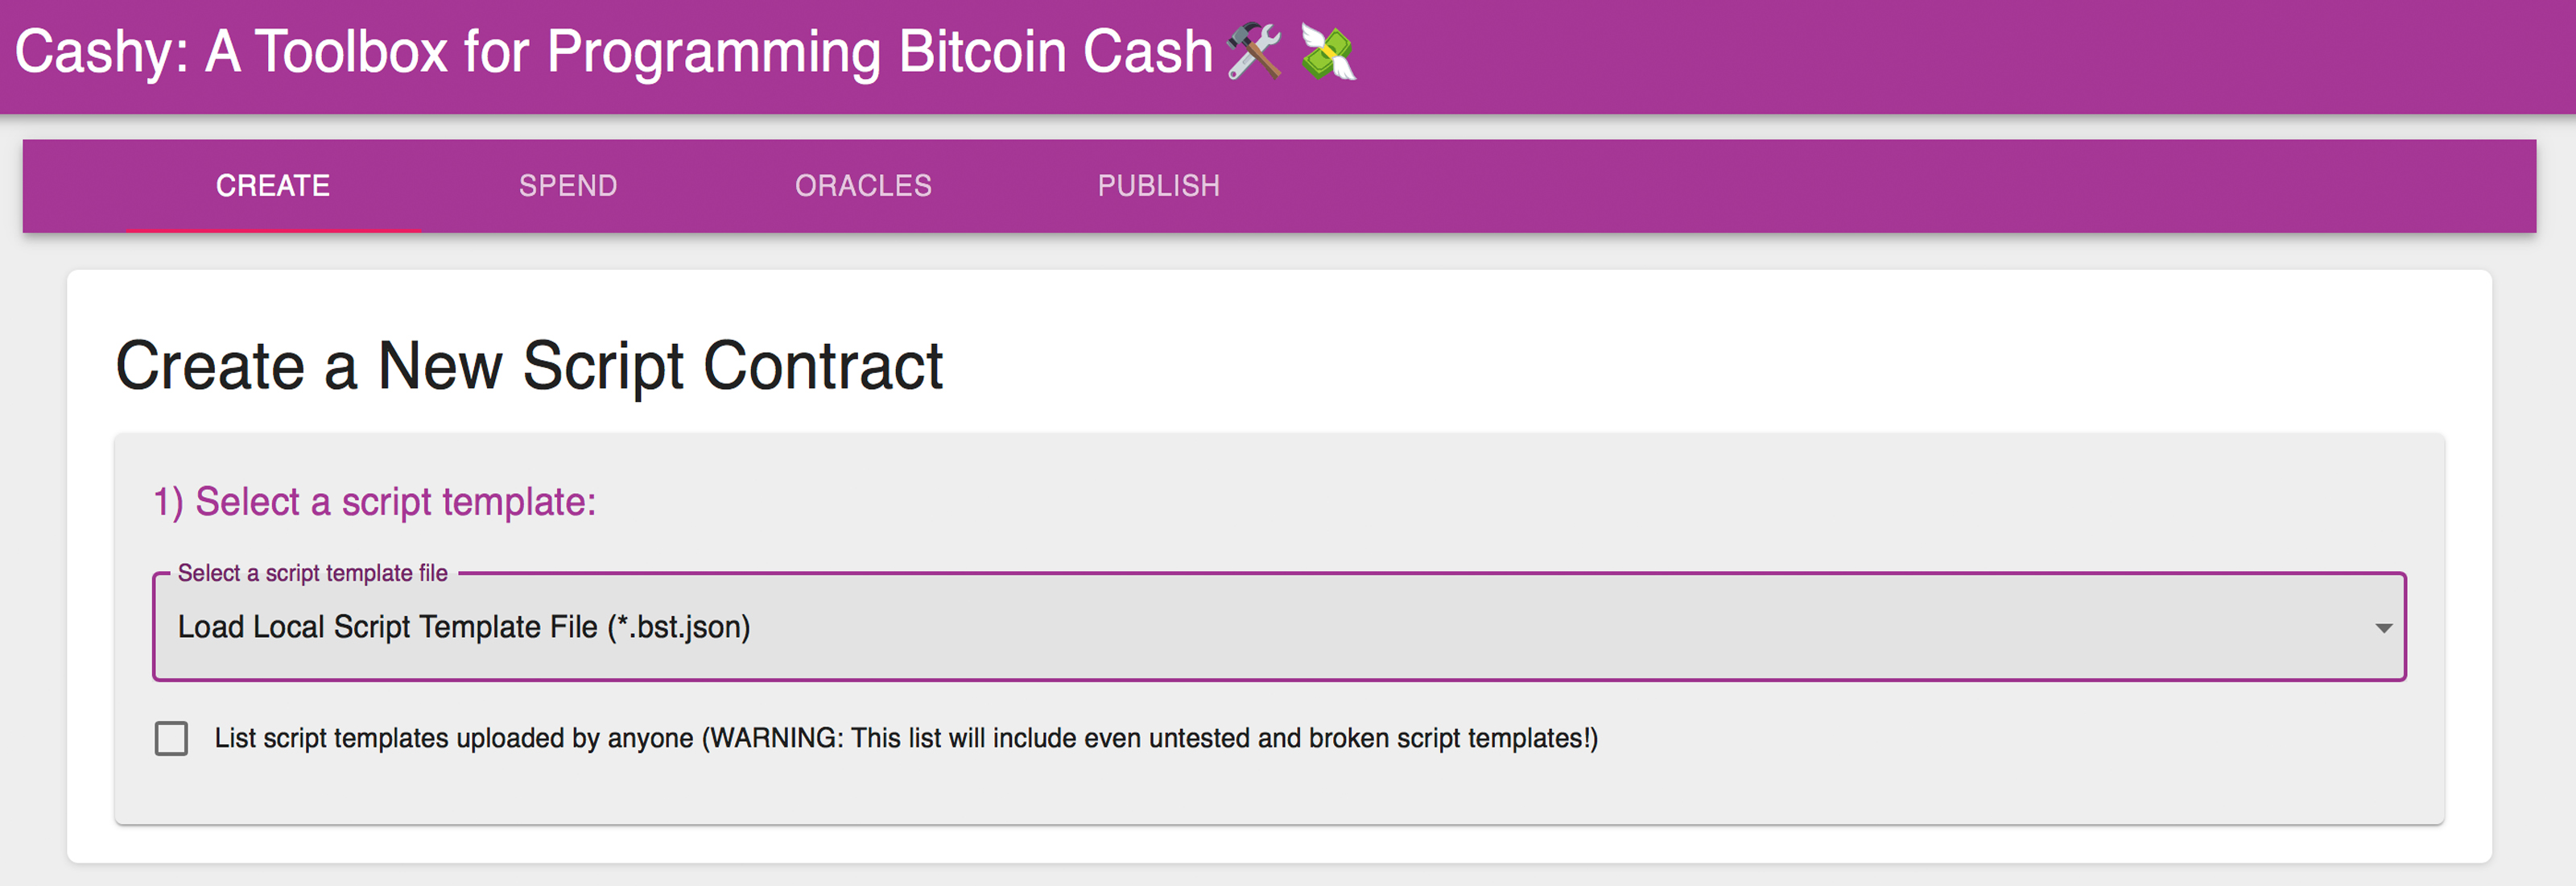 Cashy Web Application Boosts Script Contracts in Bitcoin Cash